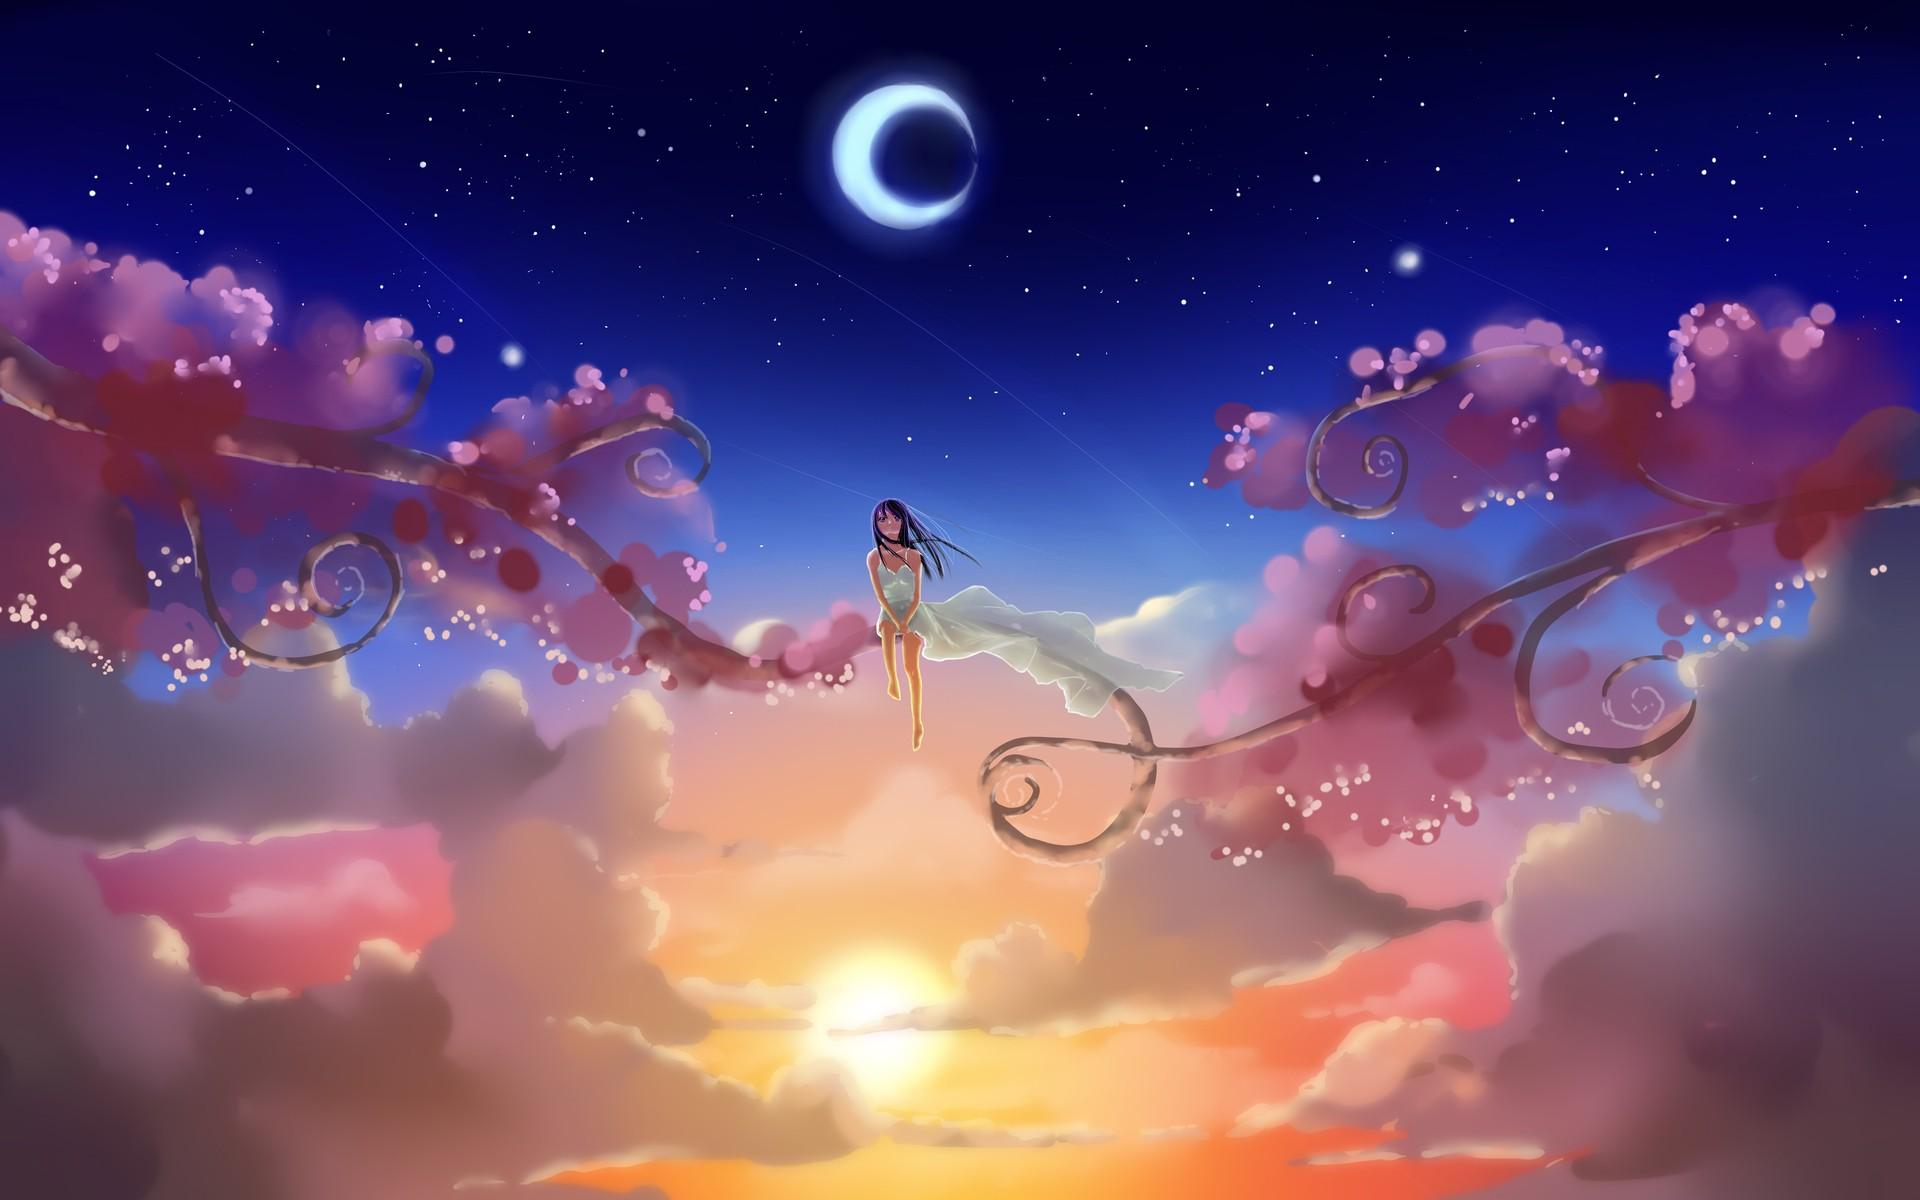 Clouds, Sun, artwork, anime, skyscapes, crescent moon Wallpapers